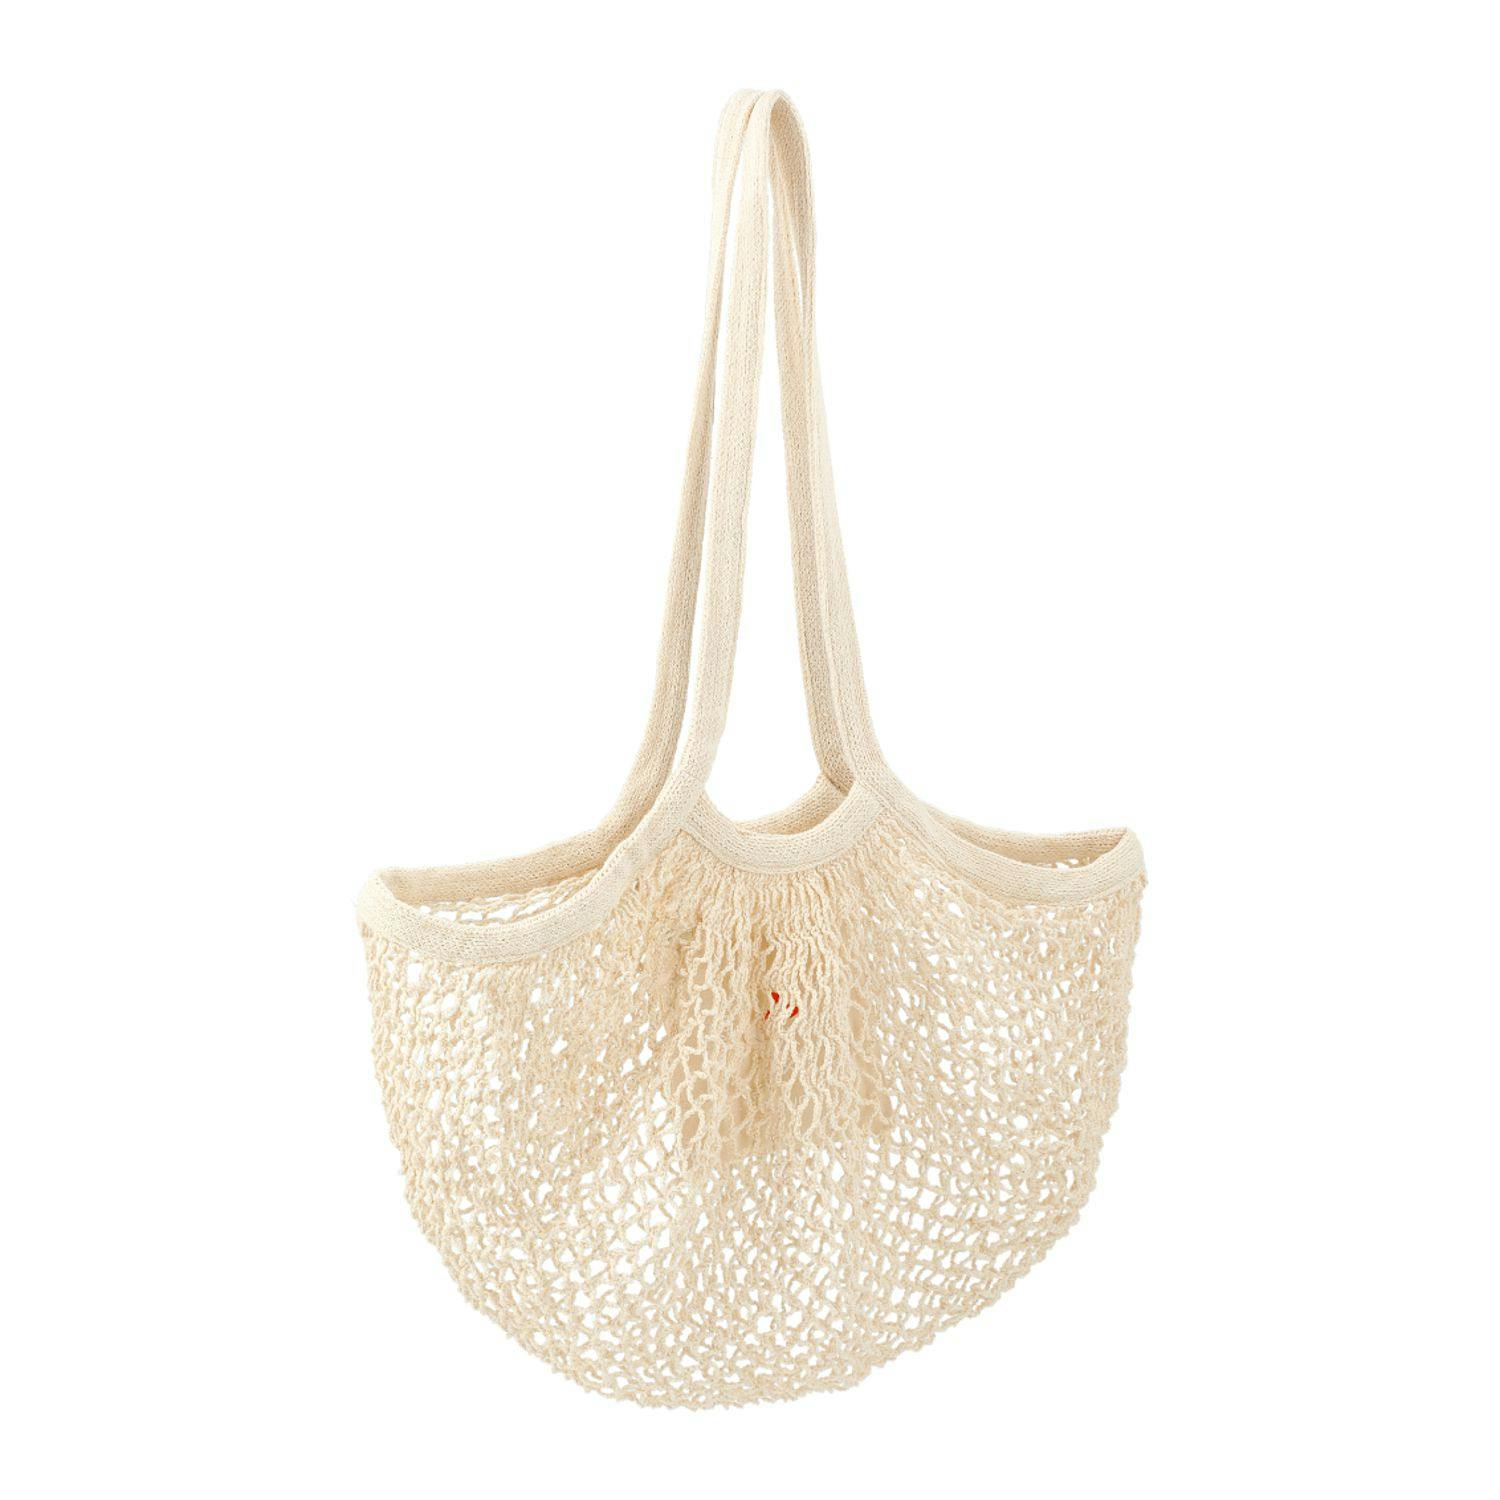 Riviera Cotton Mesh Market Bag w/Zippered Pouch - additional Image 2